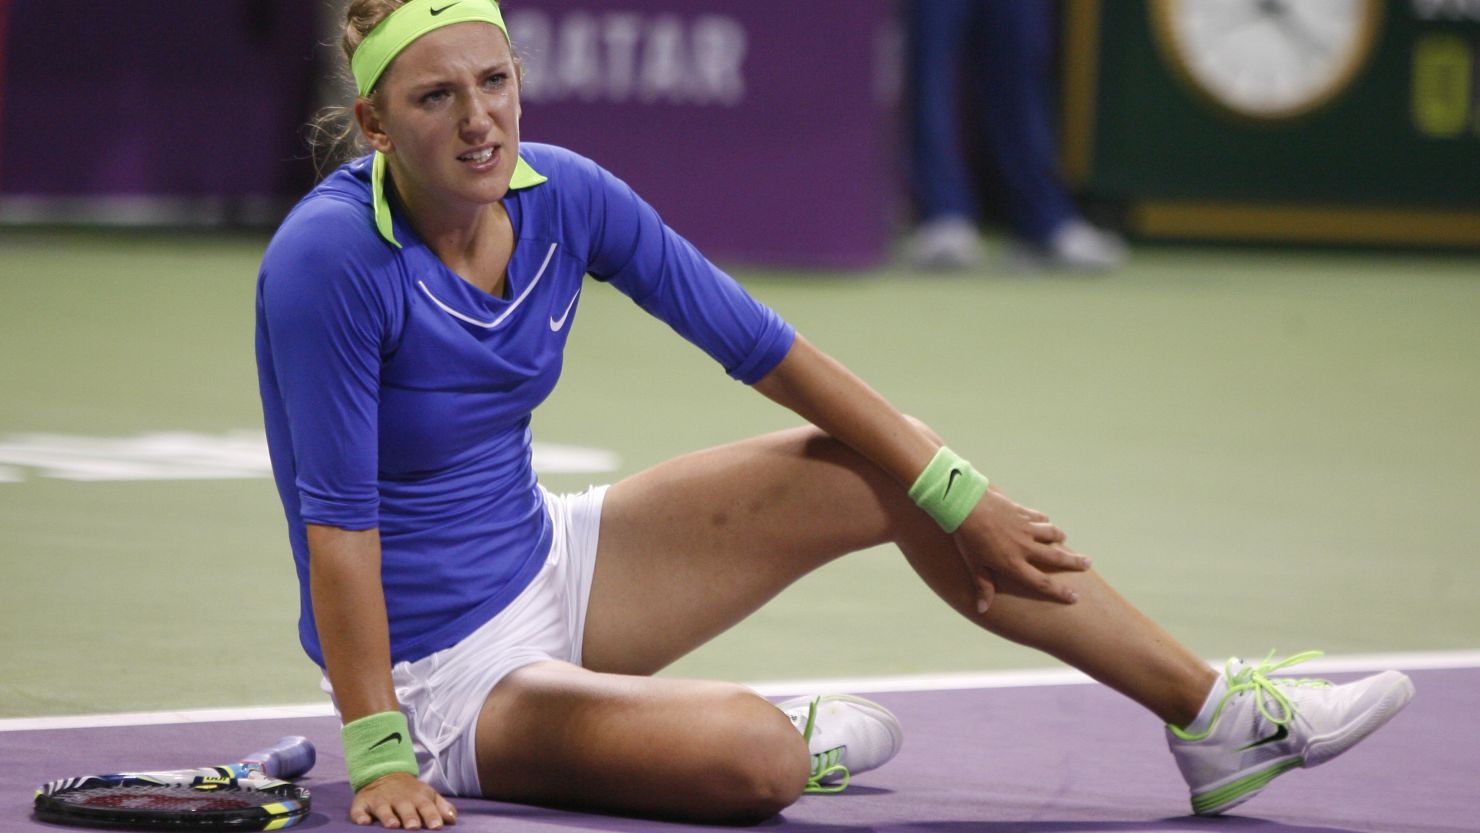 Down but not out: Victoria Azarenka clutches her ankle during her straight sets win over Aginezska Radwanska